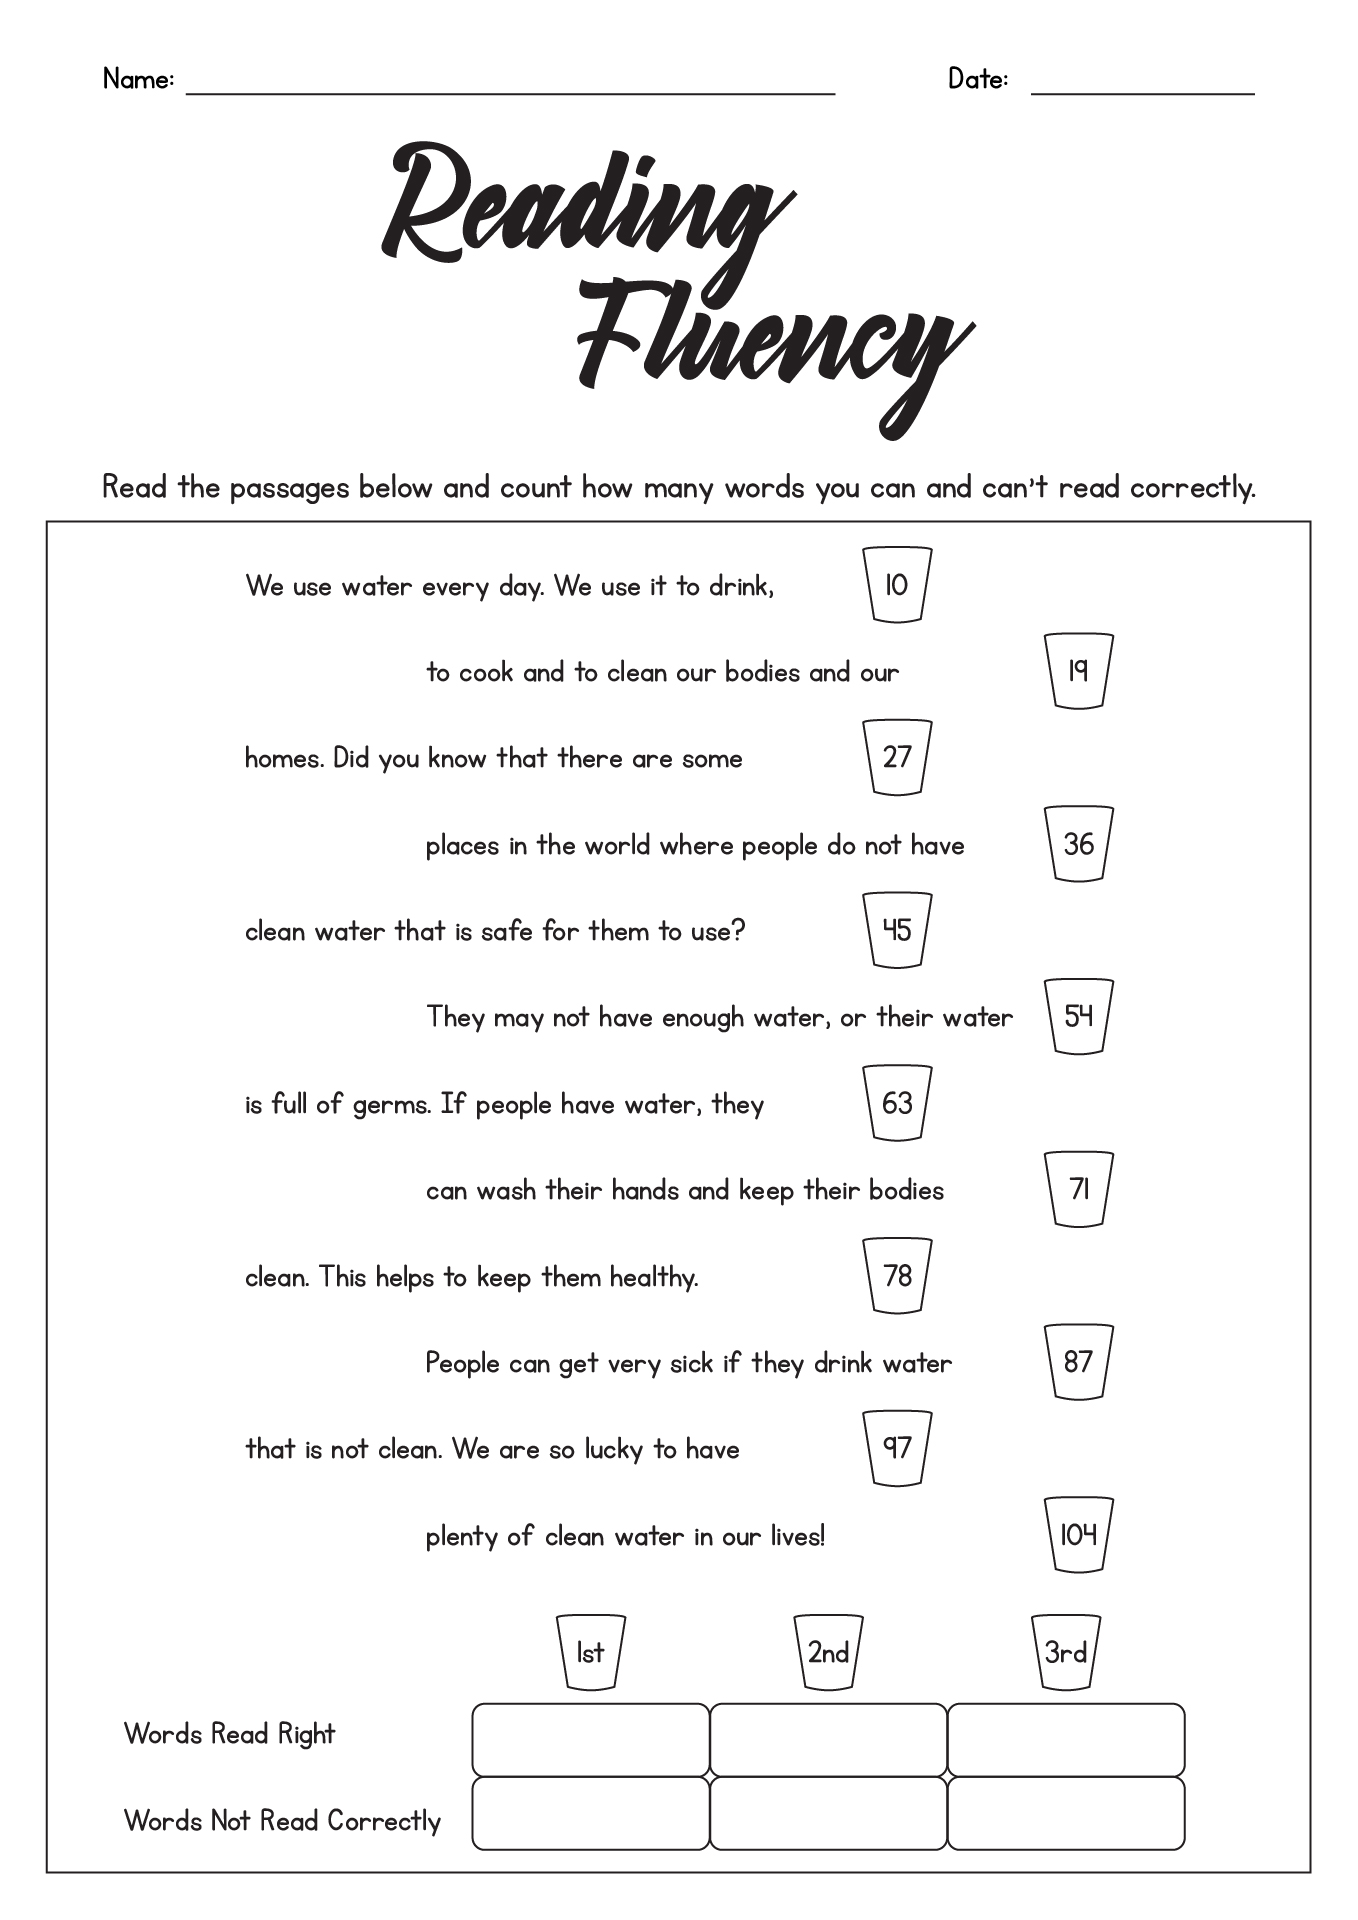 15-best-images-of-first-grade-reading-fluency-worksheets-1st-grade-reading-fluency-passages